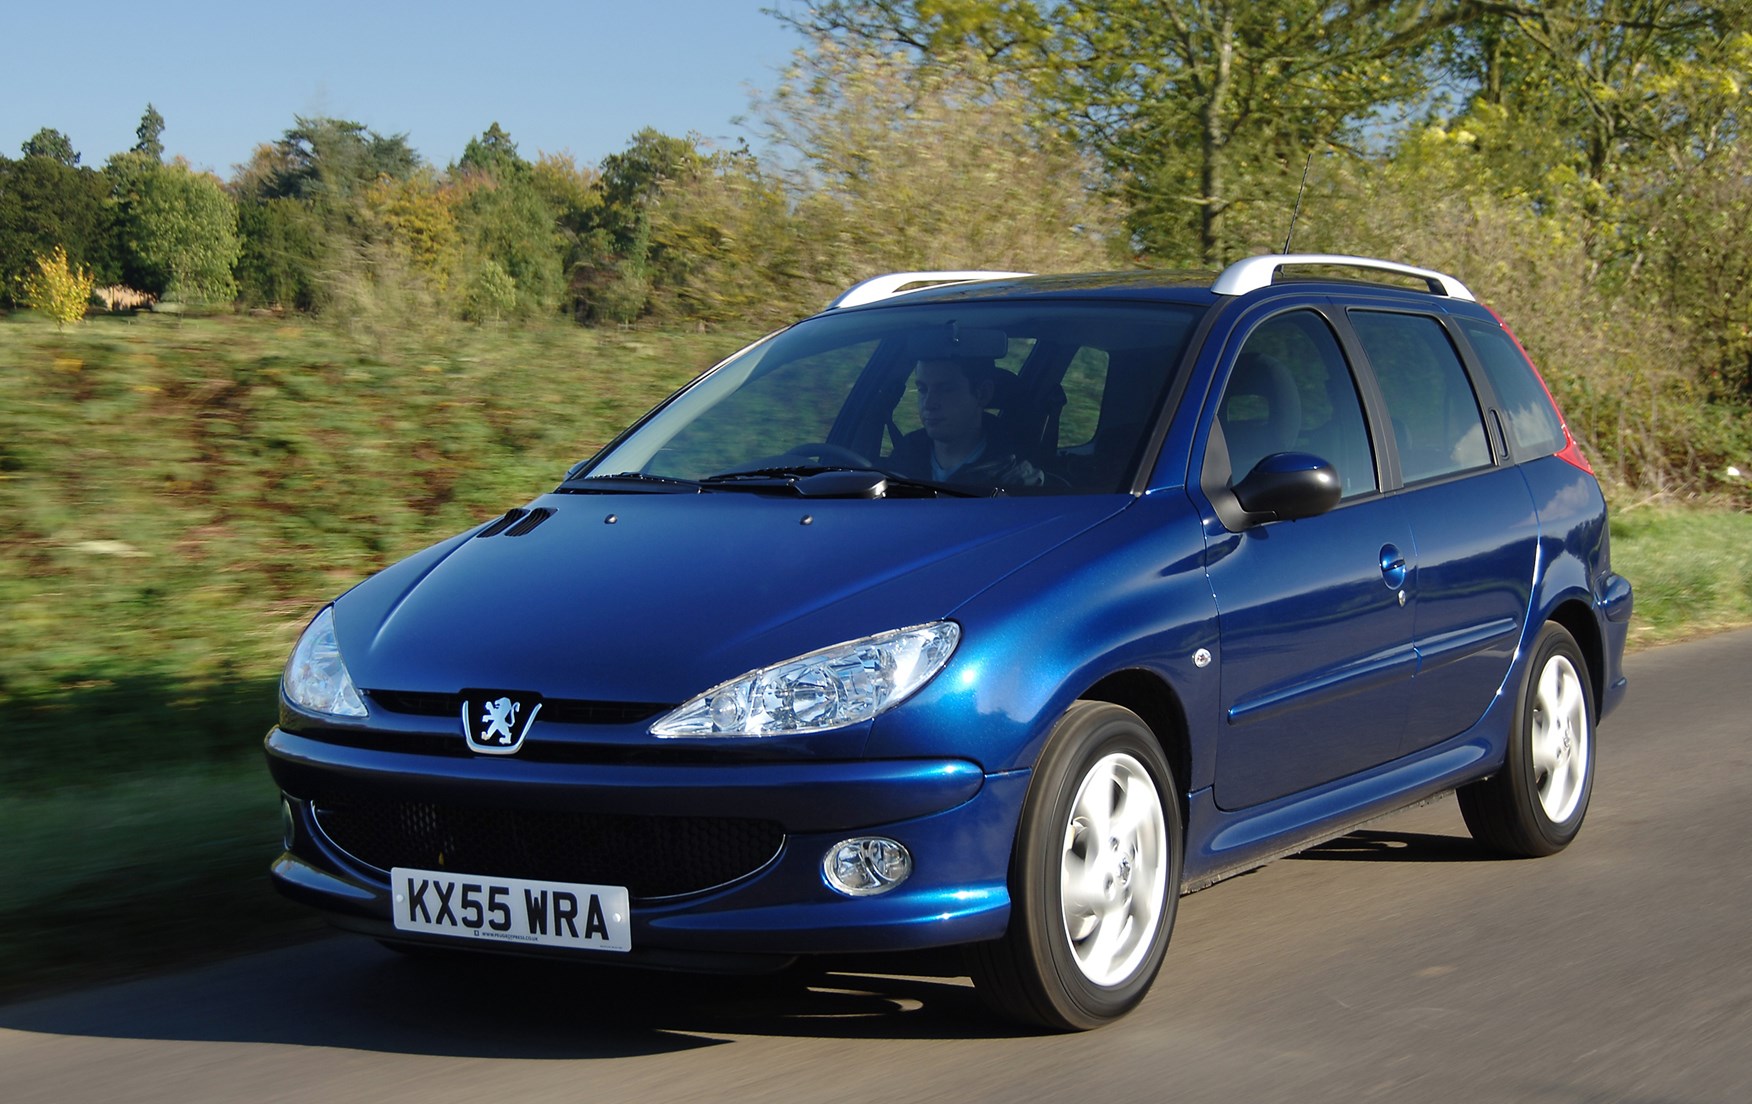 Used Peugeot 206 SW 2002 2006 Review Parkers